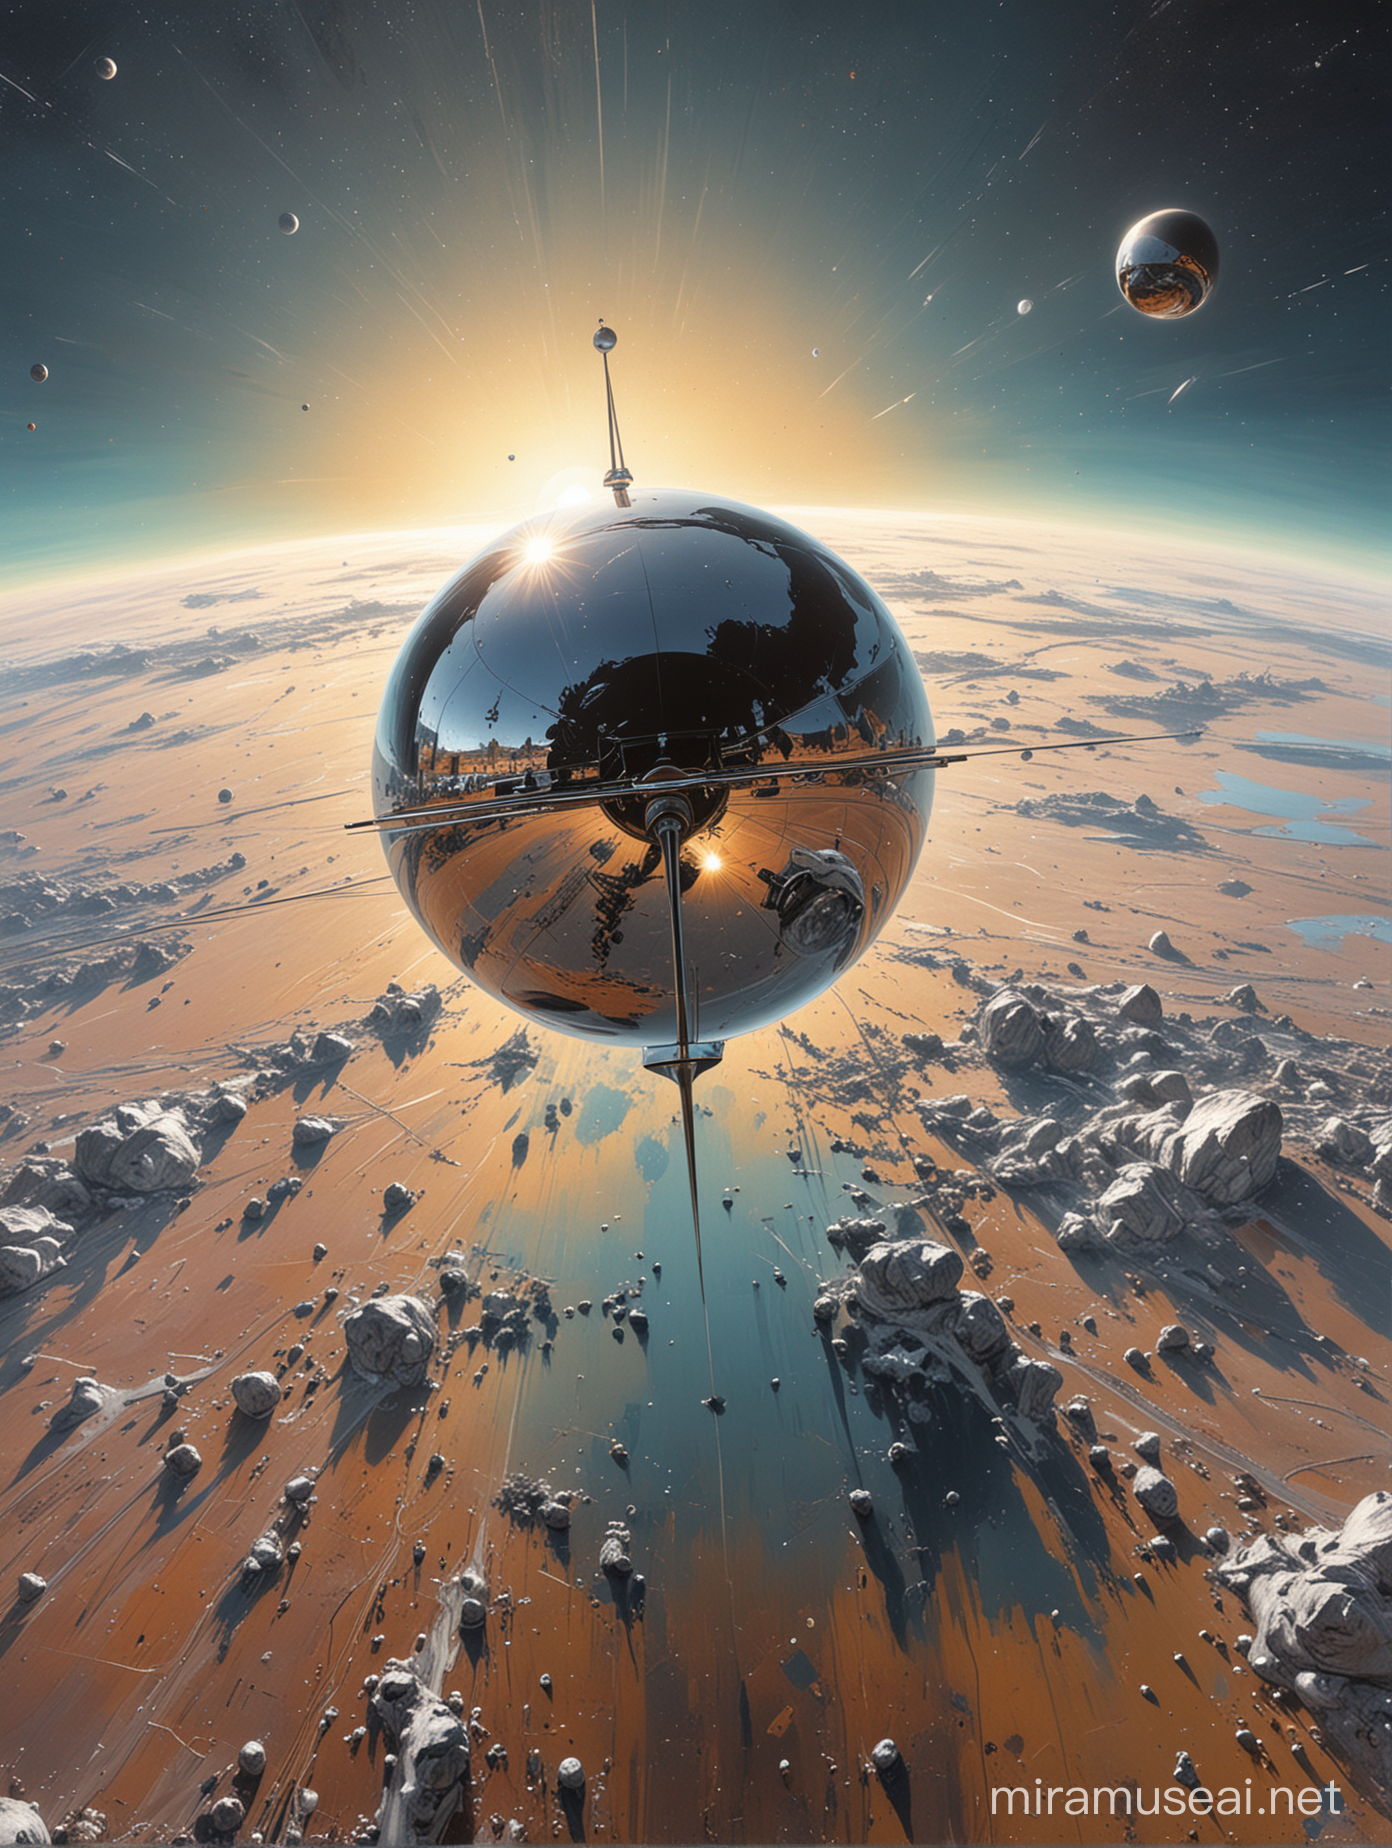 Highly detailed painting, wide view from above, (((Sputnik 1))) is alone in space and floating above the Earth, in the background the Sun is rising from behind the Earth, (((Sputnik is a plain chrome ball with aerials extending from one side))),use muted pastel colors only, high quality
